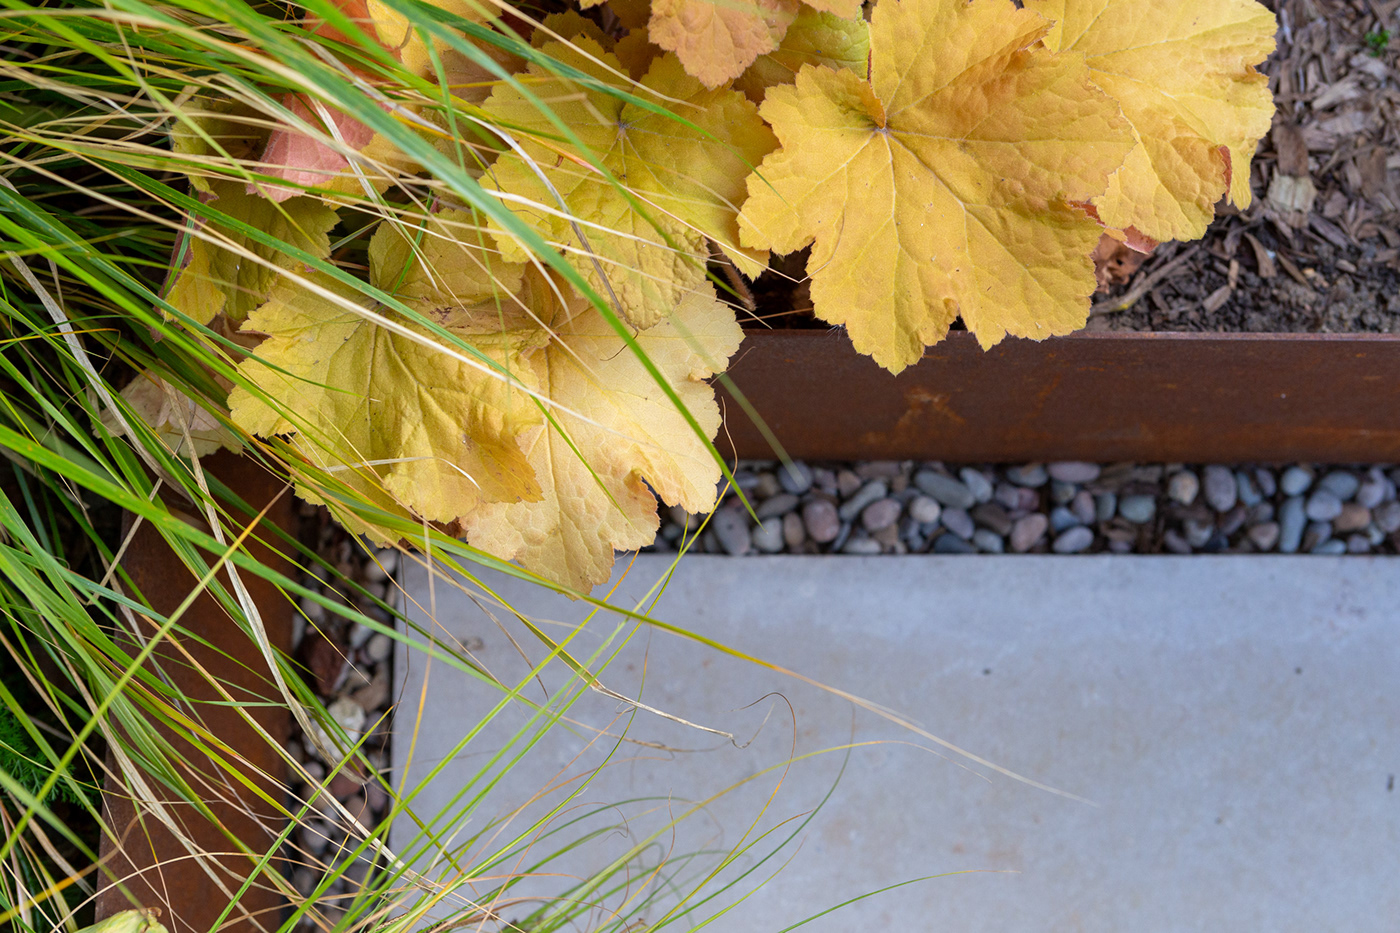 Coppery tones in the planting complement the Corten steel edging
